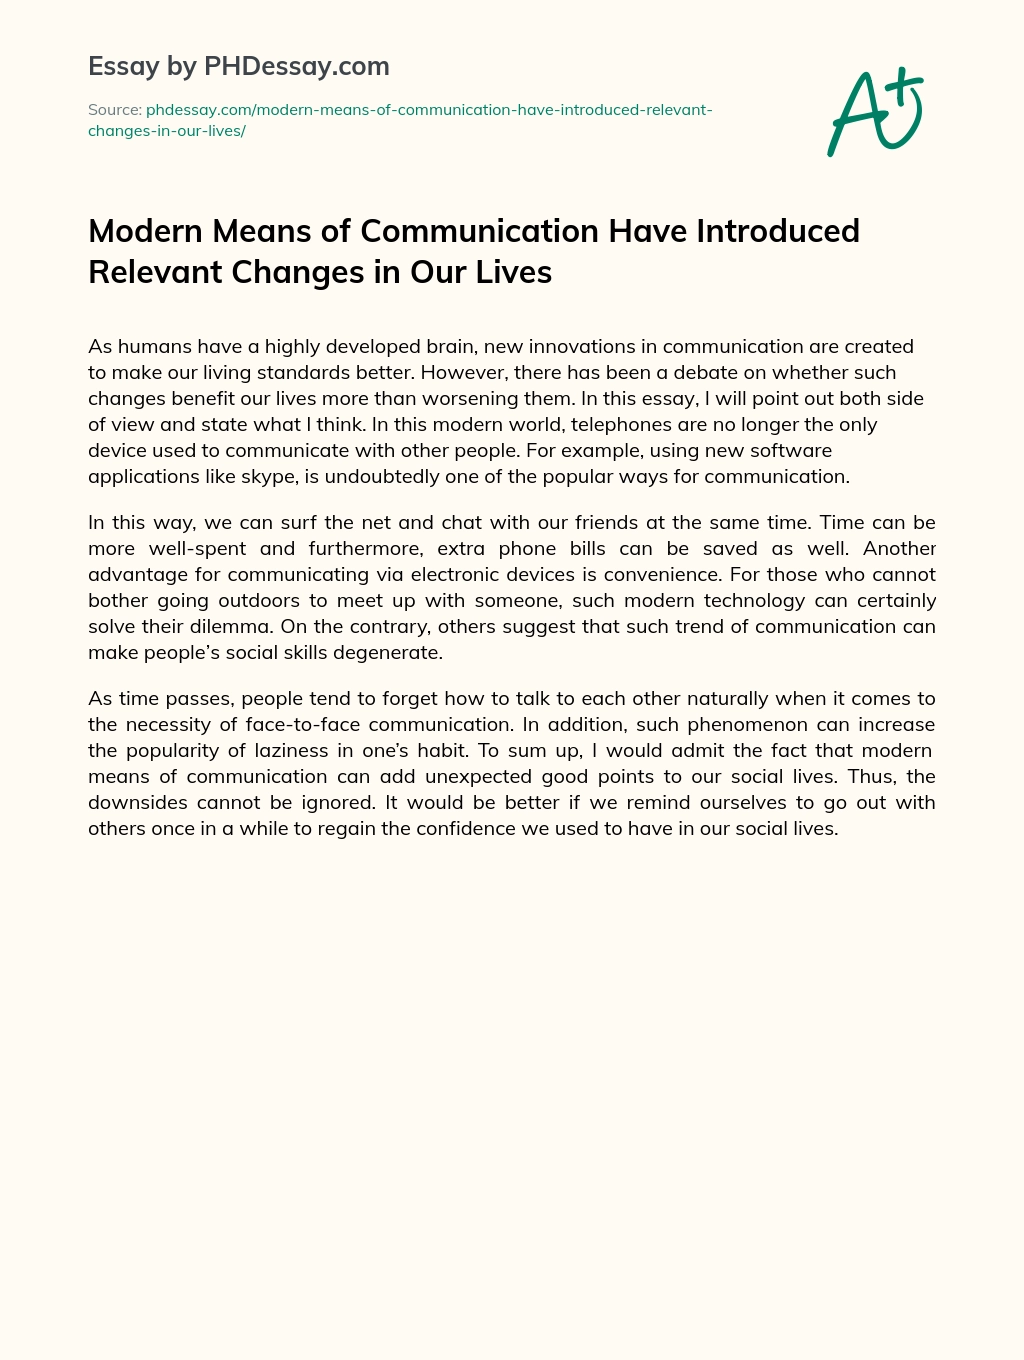 how communication has changed in the last 20 years essay